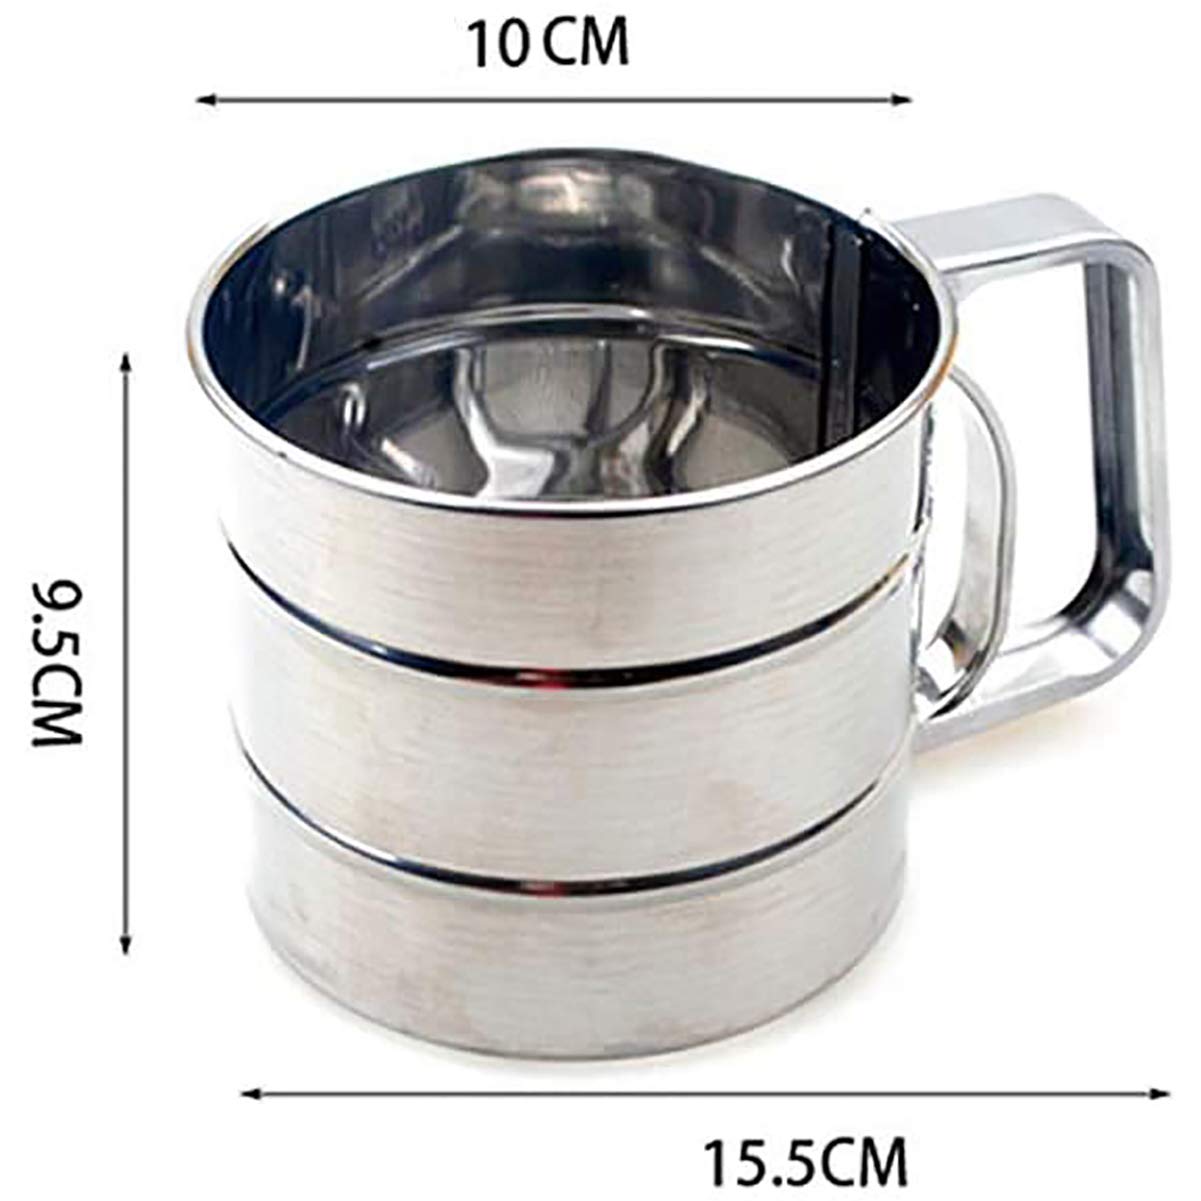 Flour Sifter, Baking Sifter Cup, Sifter for Baking, Flour Sieve with 24 Fine Mesh, Stainless Steel Handheld Baking Sieve Cup for Sugar, Flour, Coffee Powder